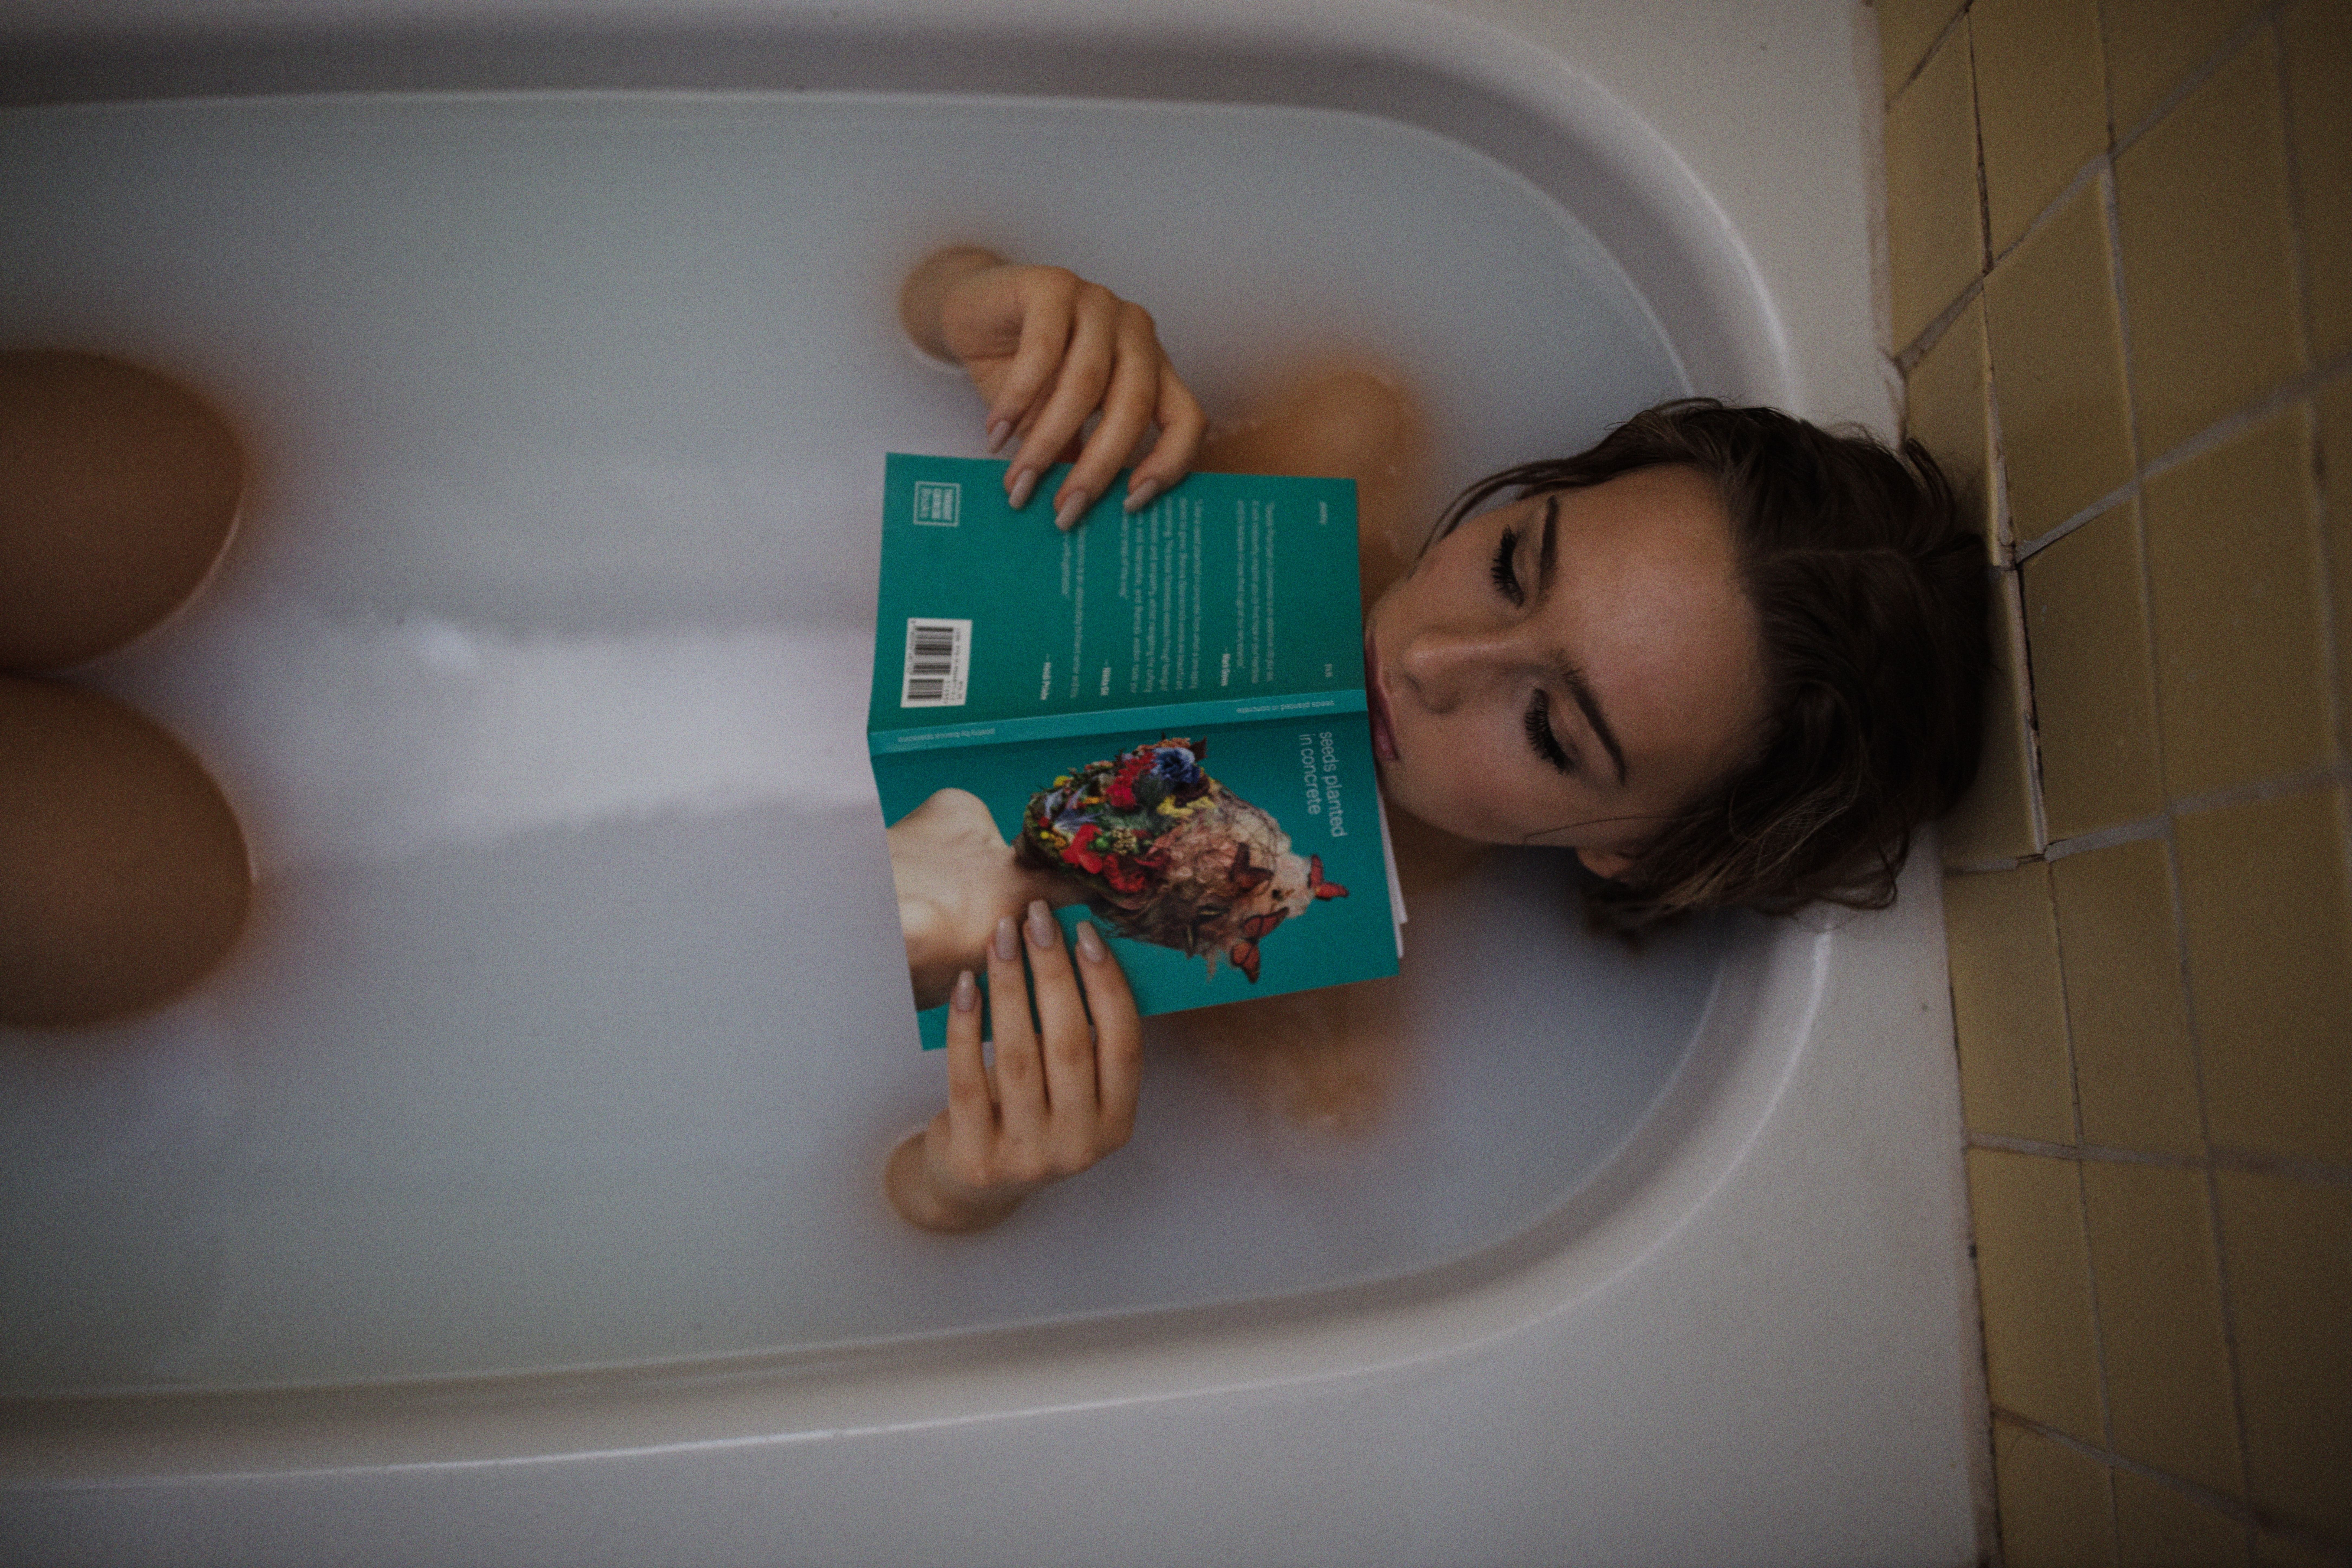 woman relaxing in the bath tub